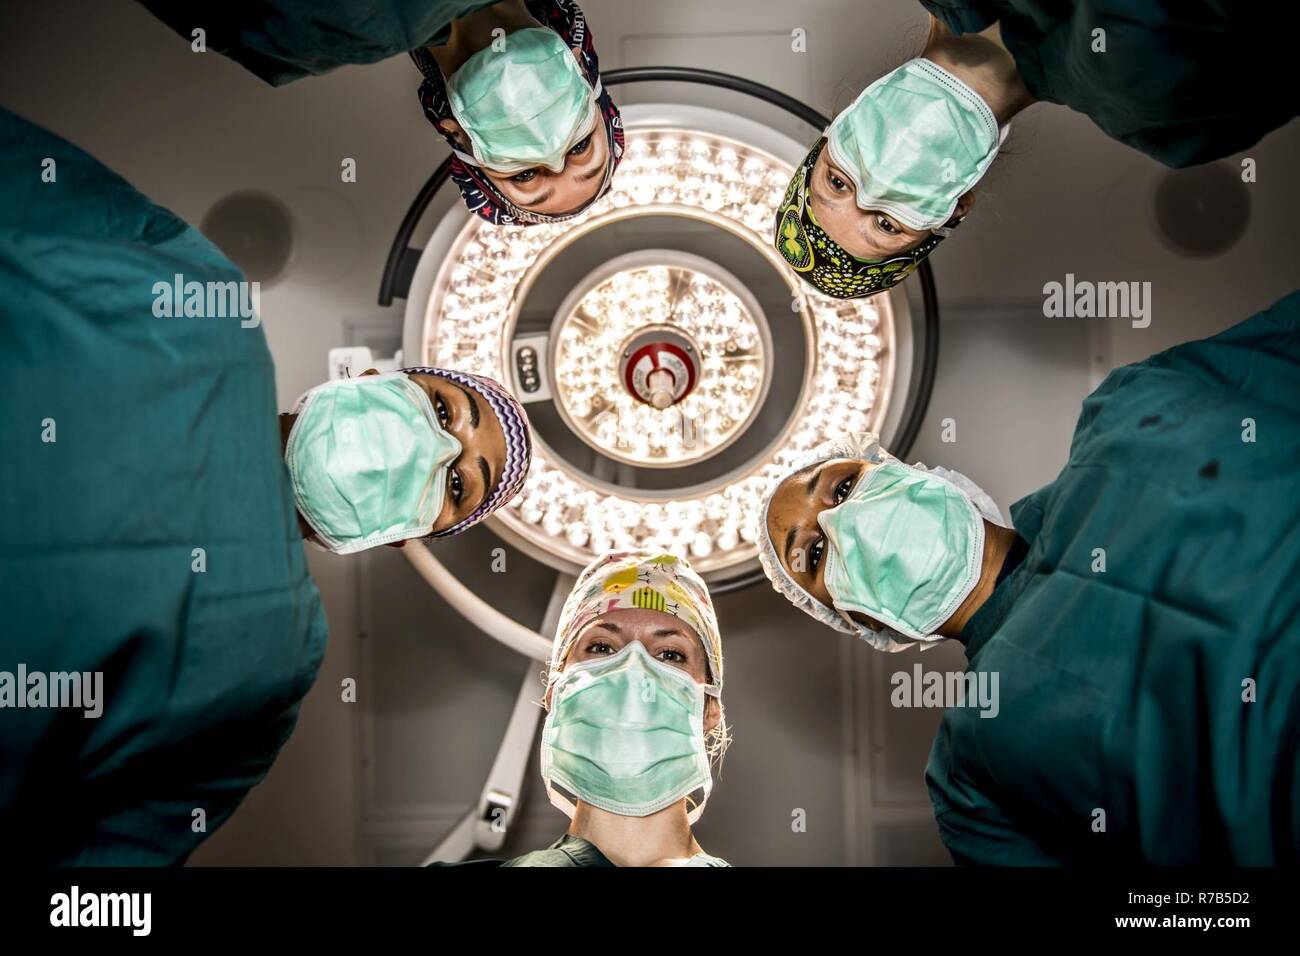 FORT BELVOIR, Va. (April 12, 2017)  Female surgeons of the Belvoir Hospital take a moment to recreate a recent image from the New Yorker magazine as a display of pride and diversity. Stock Photo